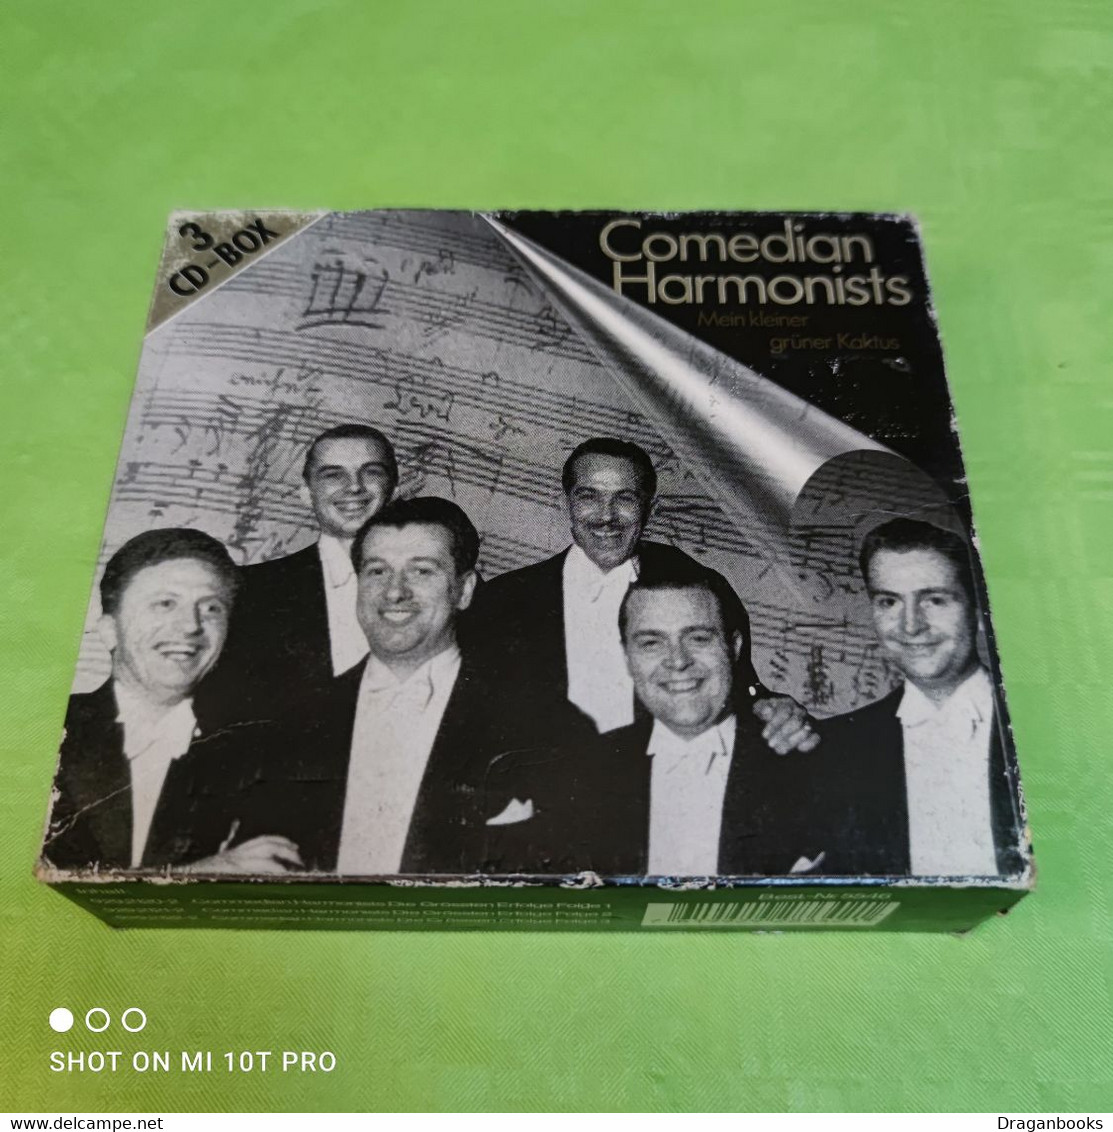 Comedian Marmonists - 3 CD Box - Andere - Duitstalig